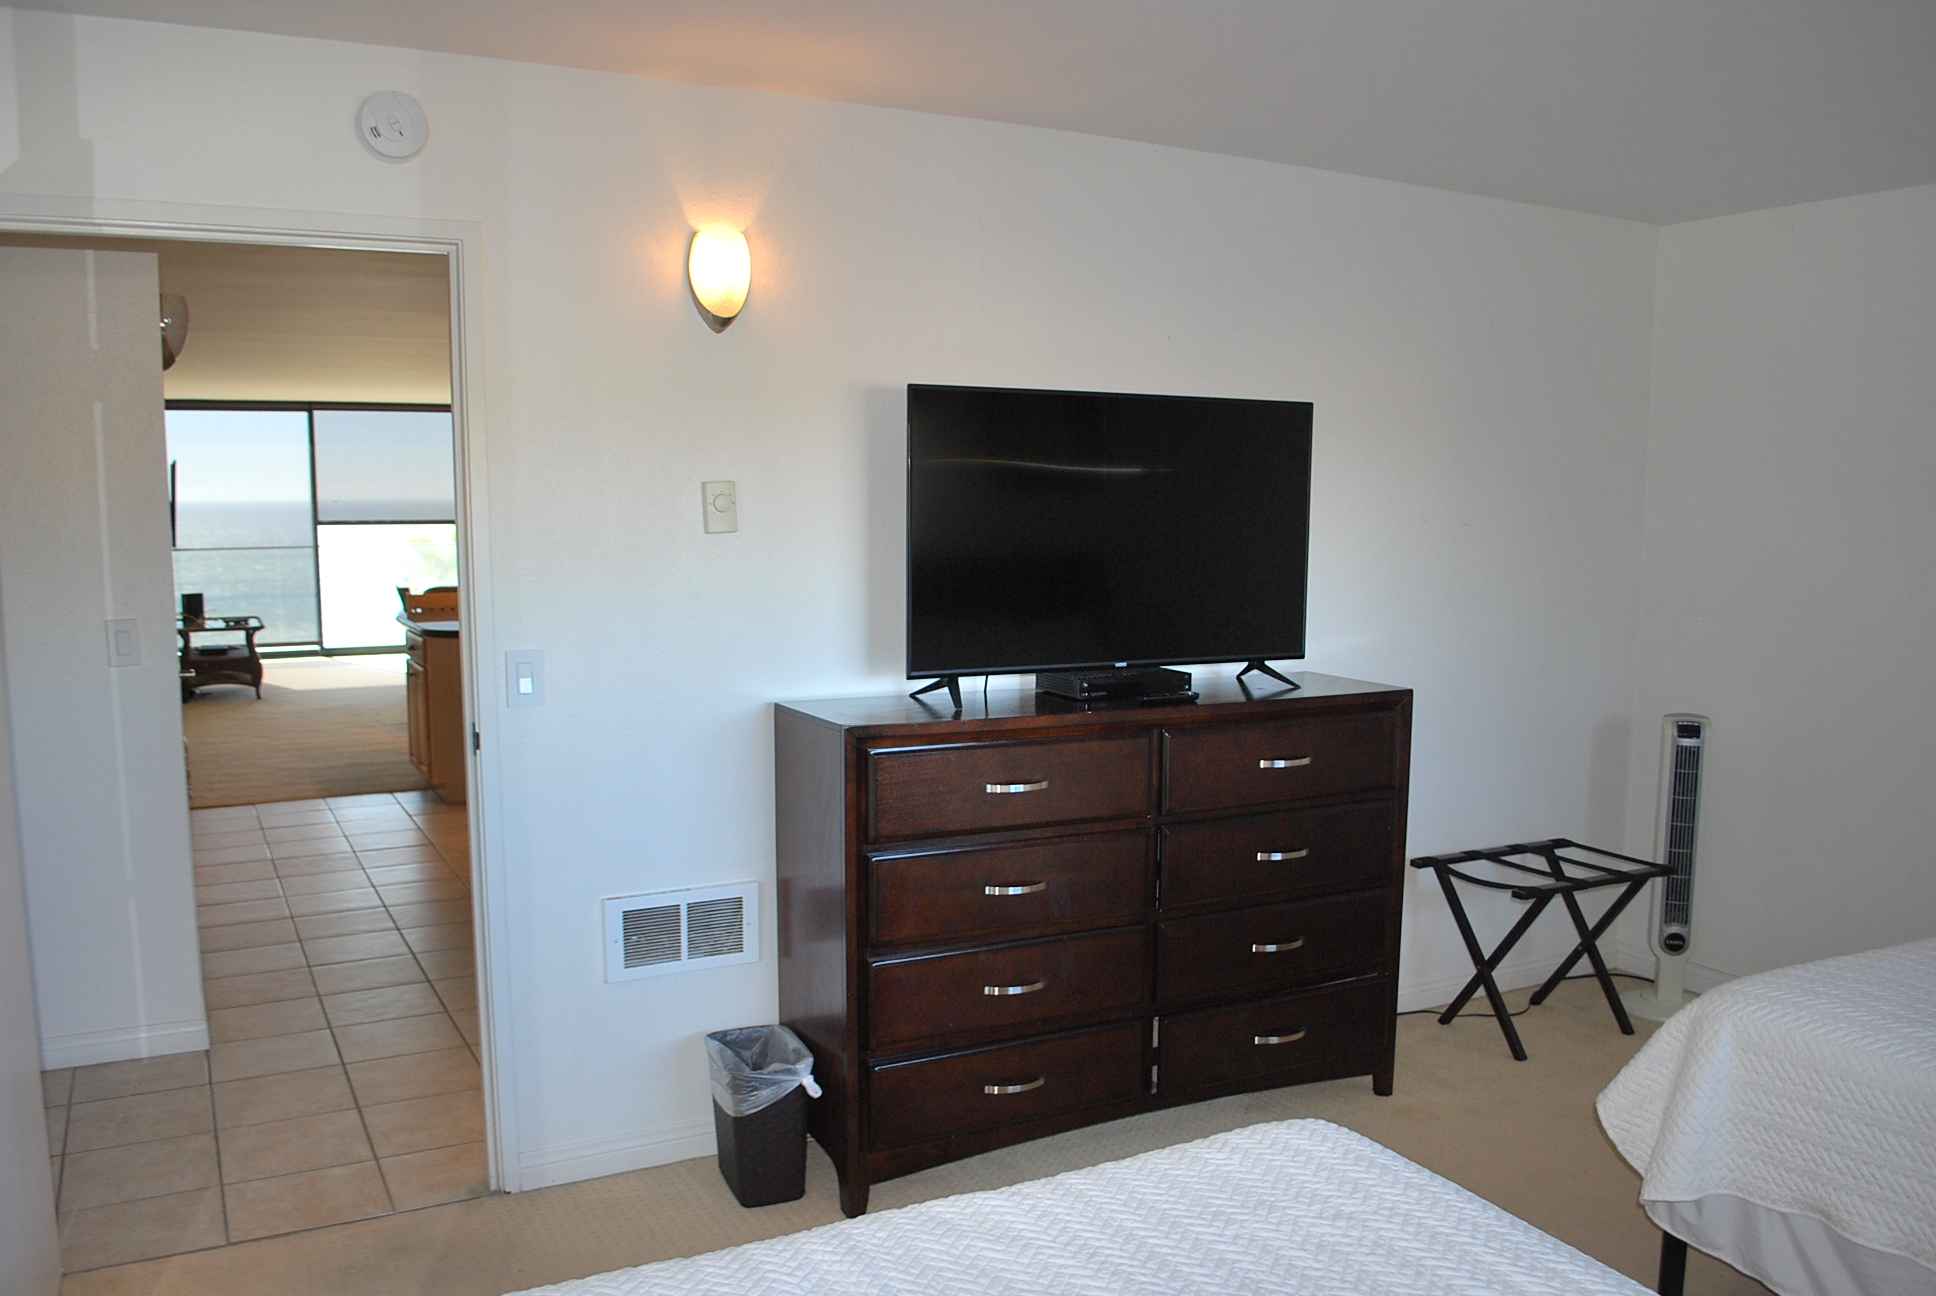 304 Bedroom with TV and dresser